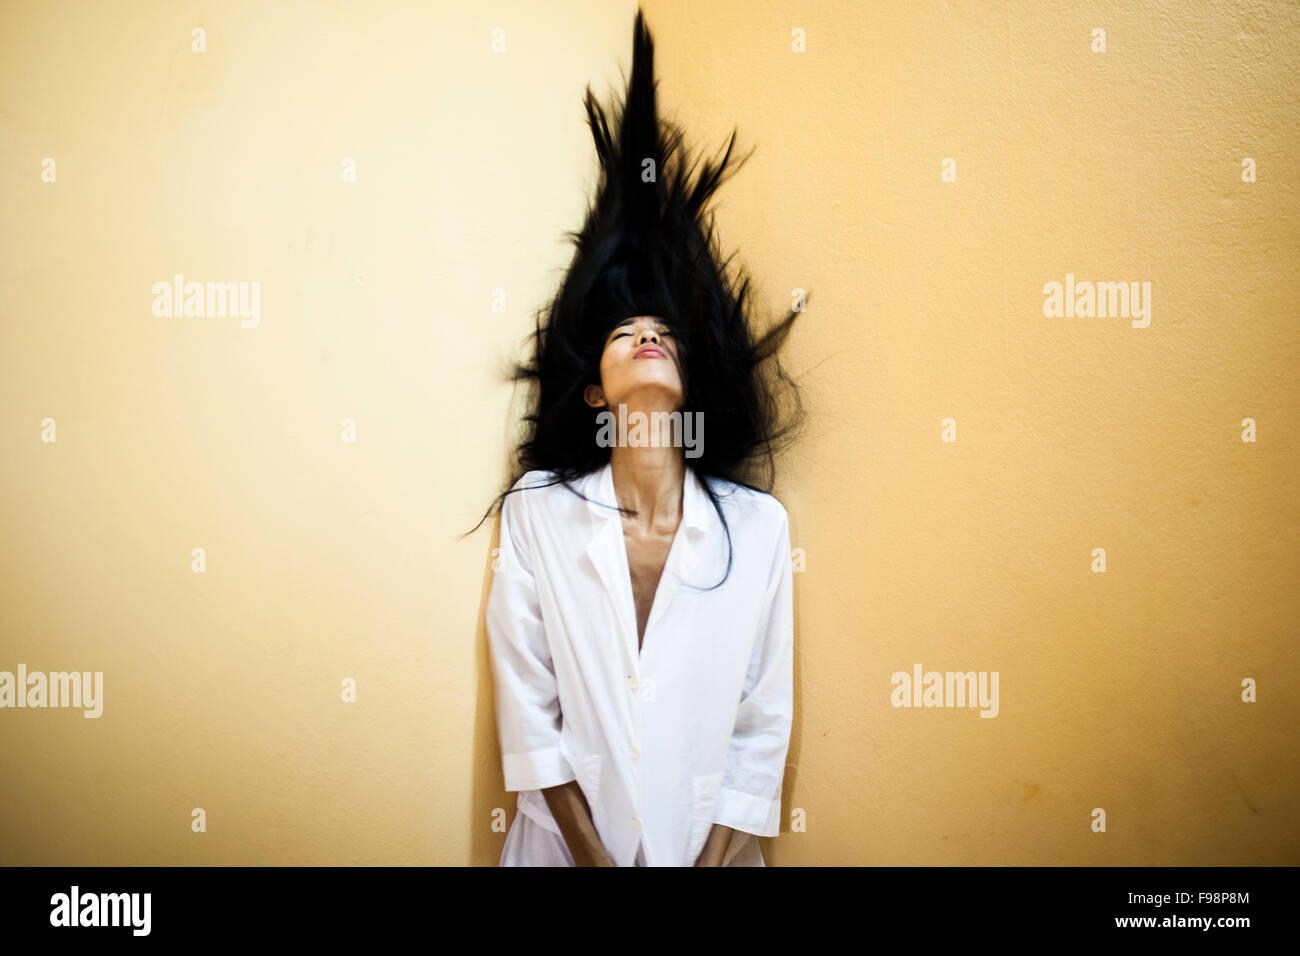 A young Asian woman flipping her hair back in Hanoi, Vietnam. Stock Photo